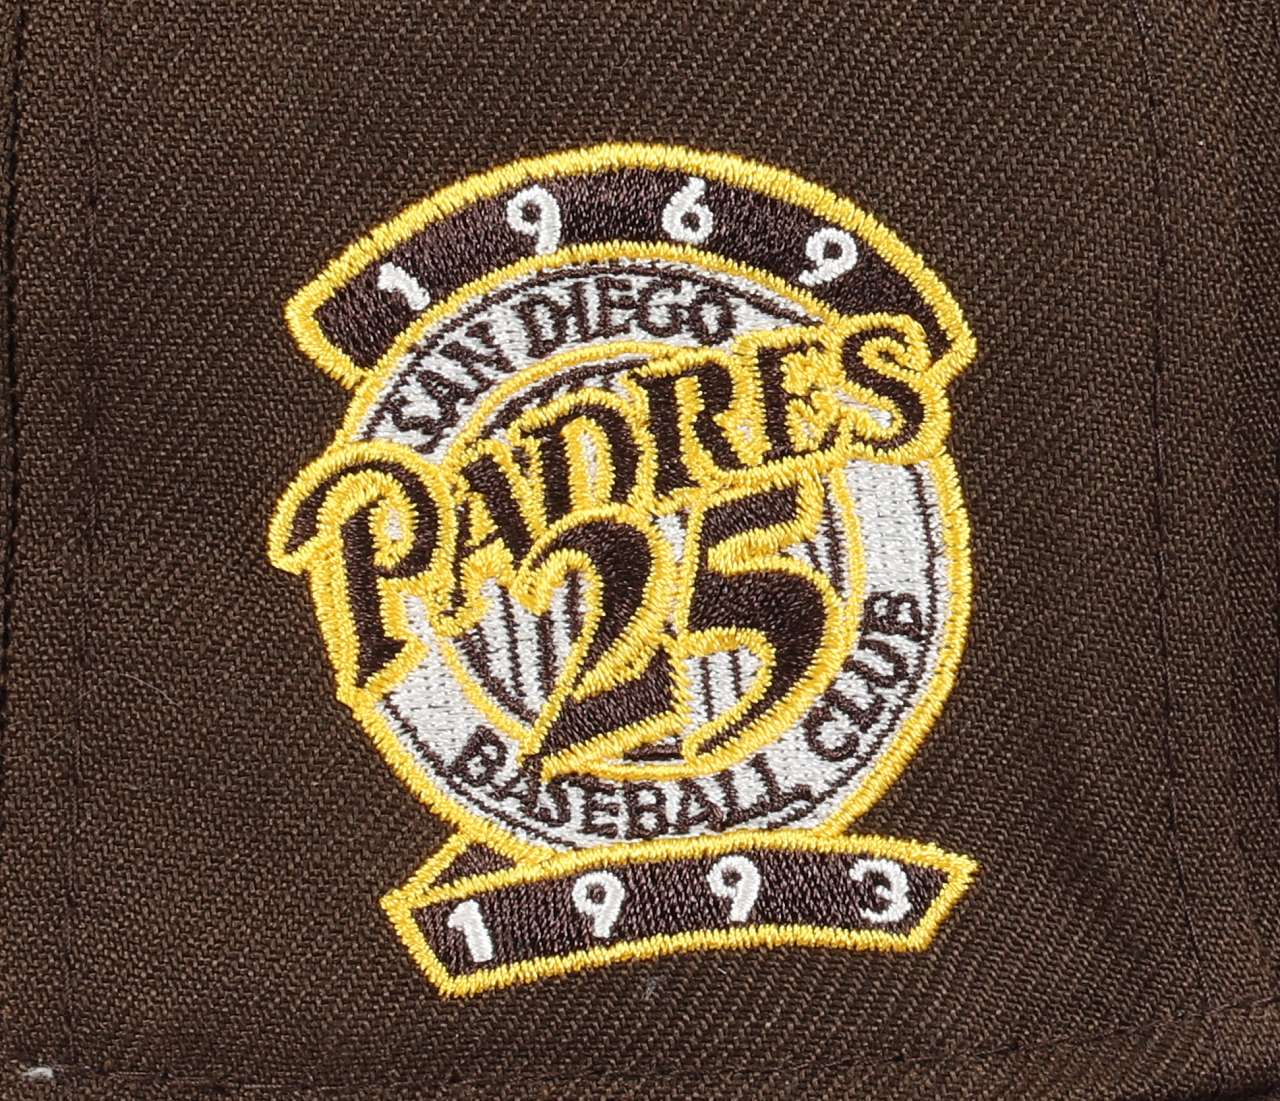 San Diego Padres MLB 25th Anniversary Sidepatch Brown 59Fifty Basecap New Era